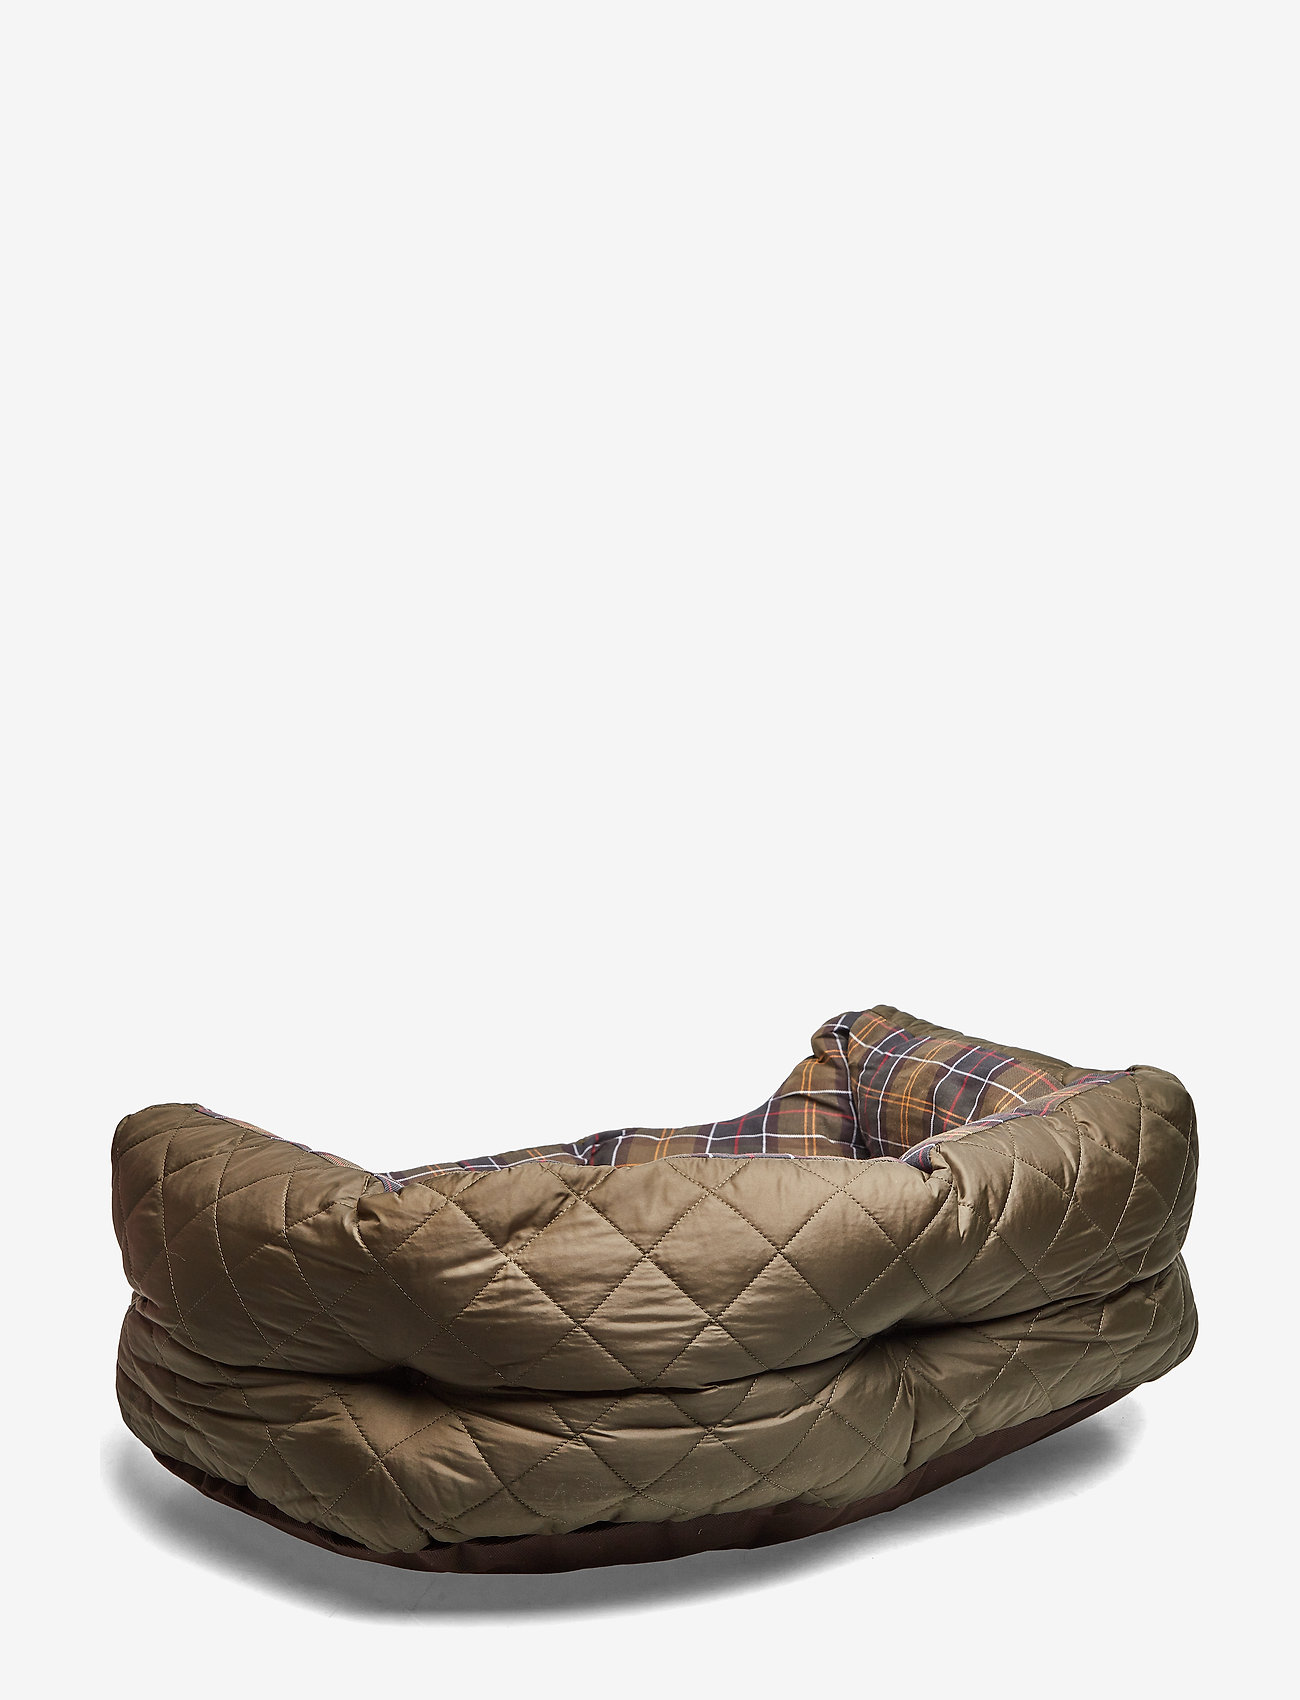 Barbour - Barbour Quilted Bed 30 - hundebetten - olive - 1